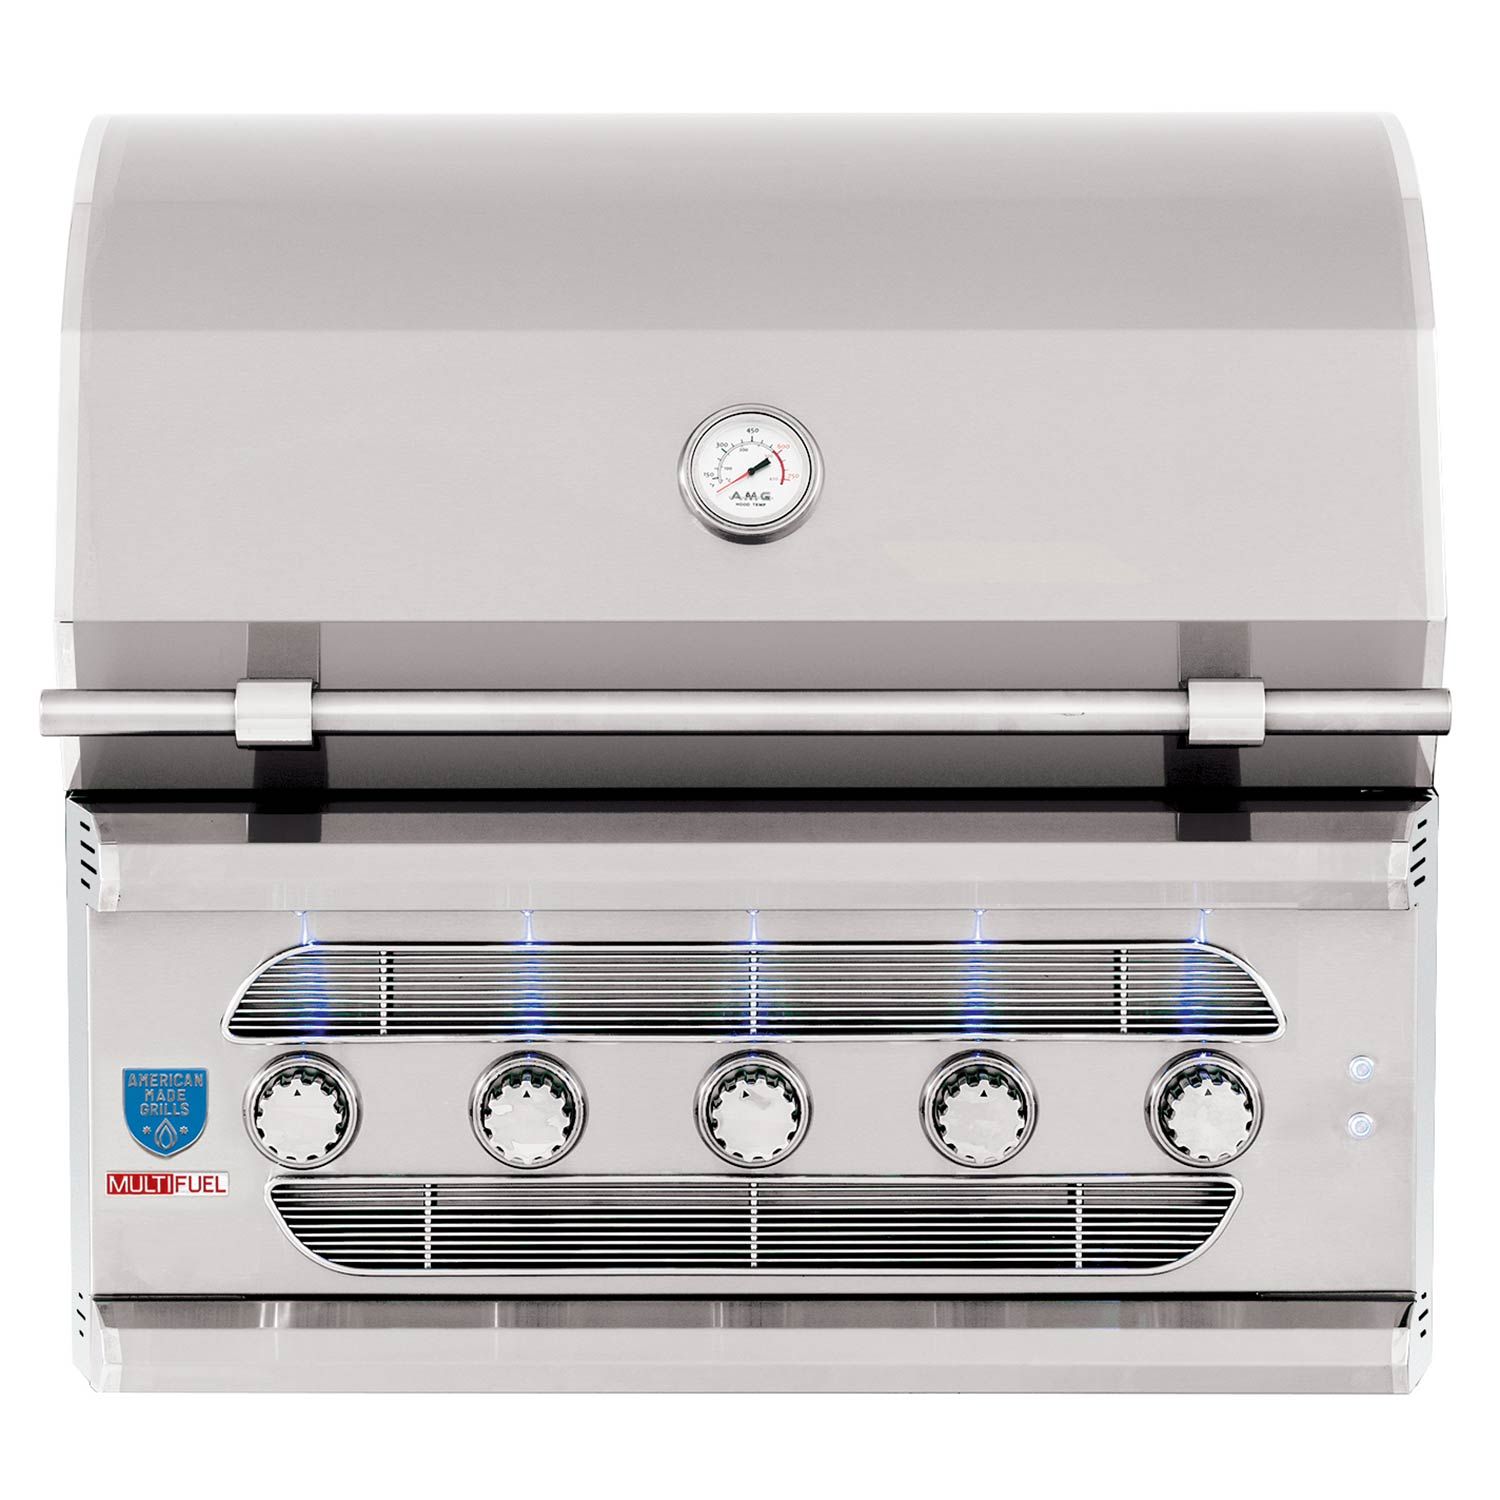 American Made Grills Muscle 36 inch Built-In Grills Outdoor Grills Liquid Propane 12030965